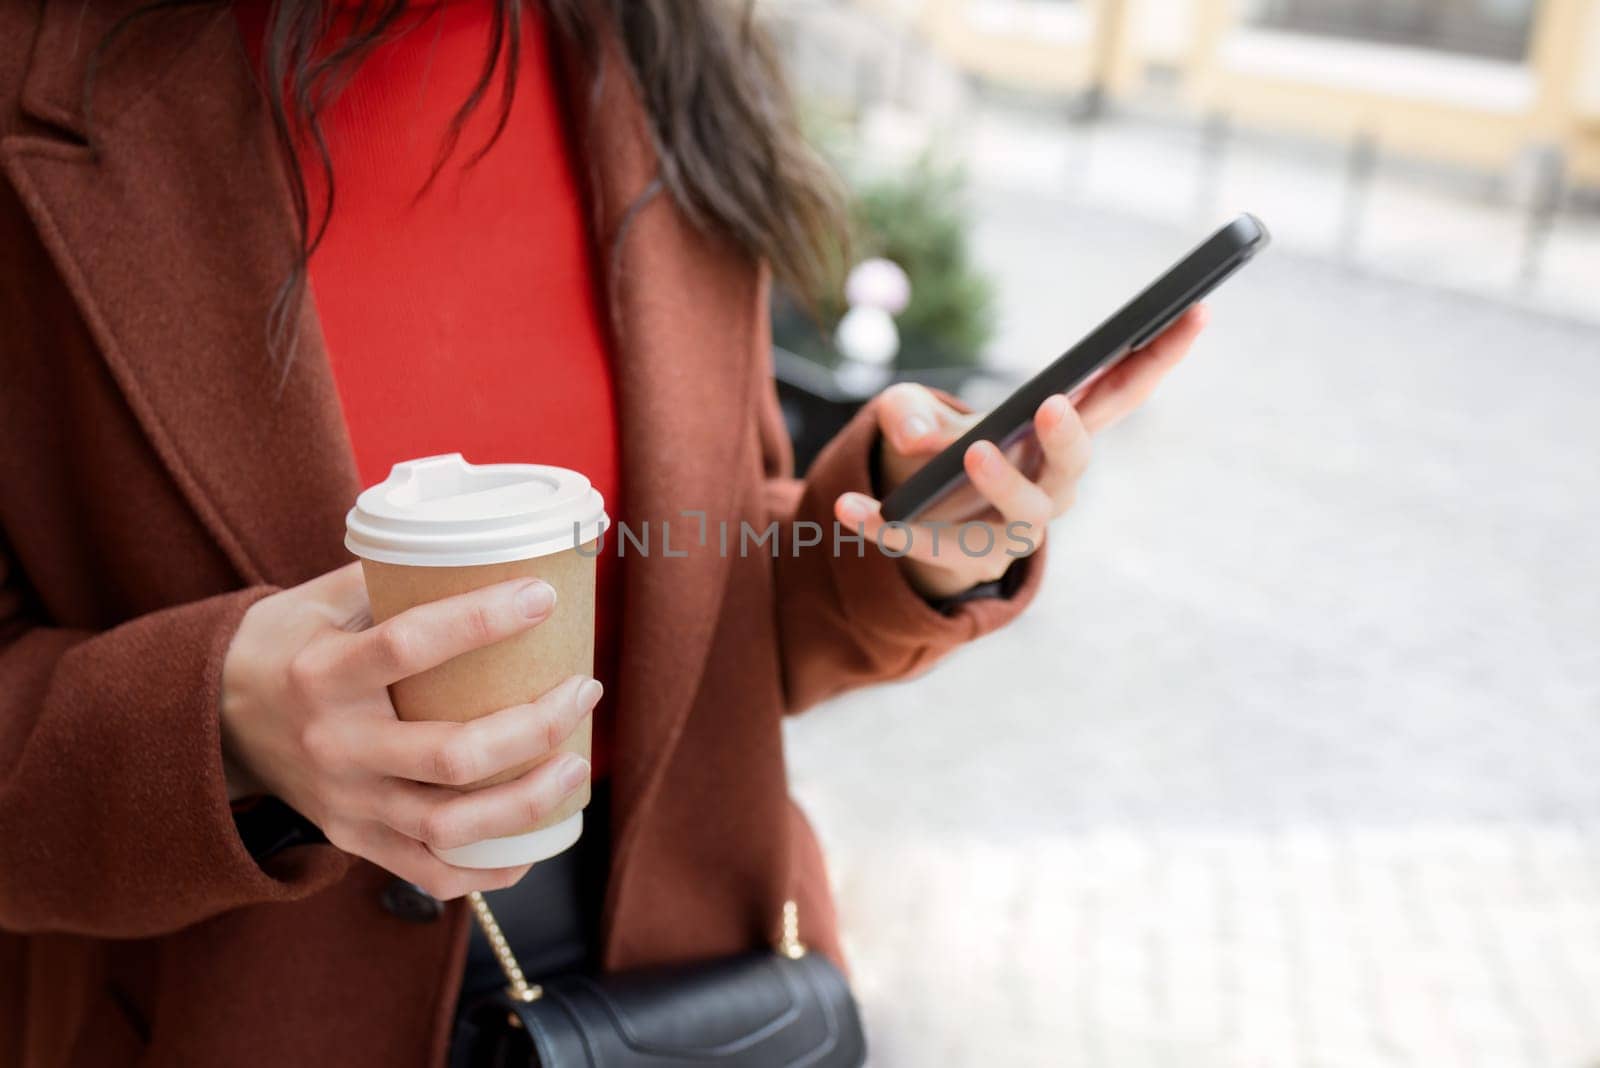 Woman uses mobile phone on the street and sips coffee.